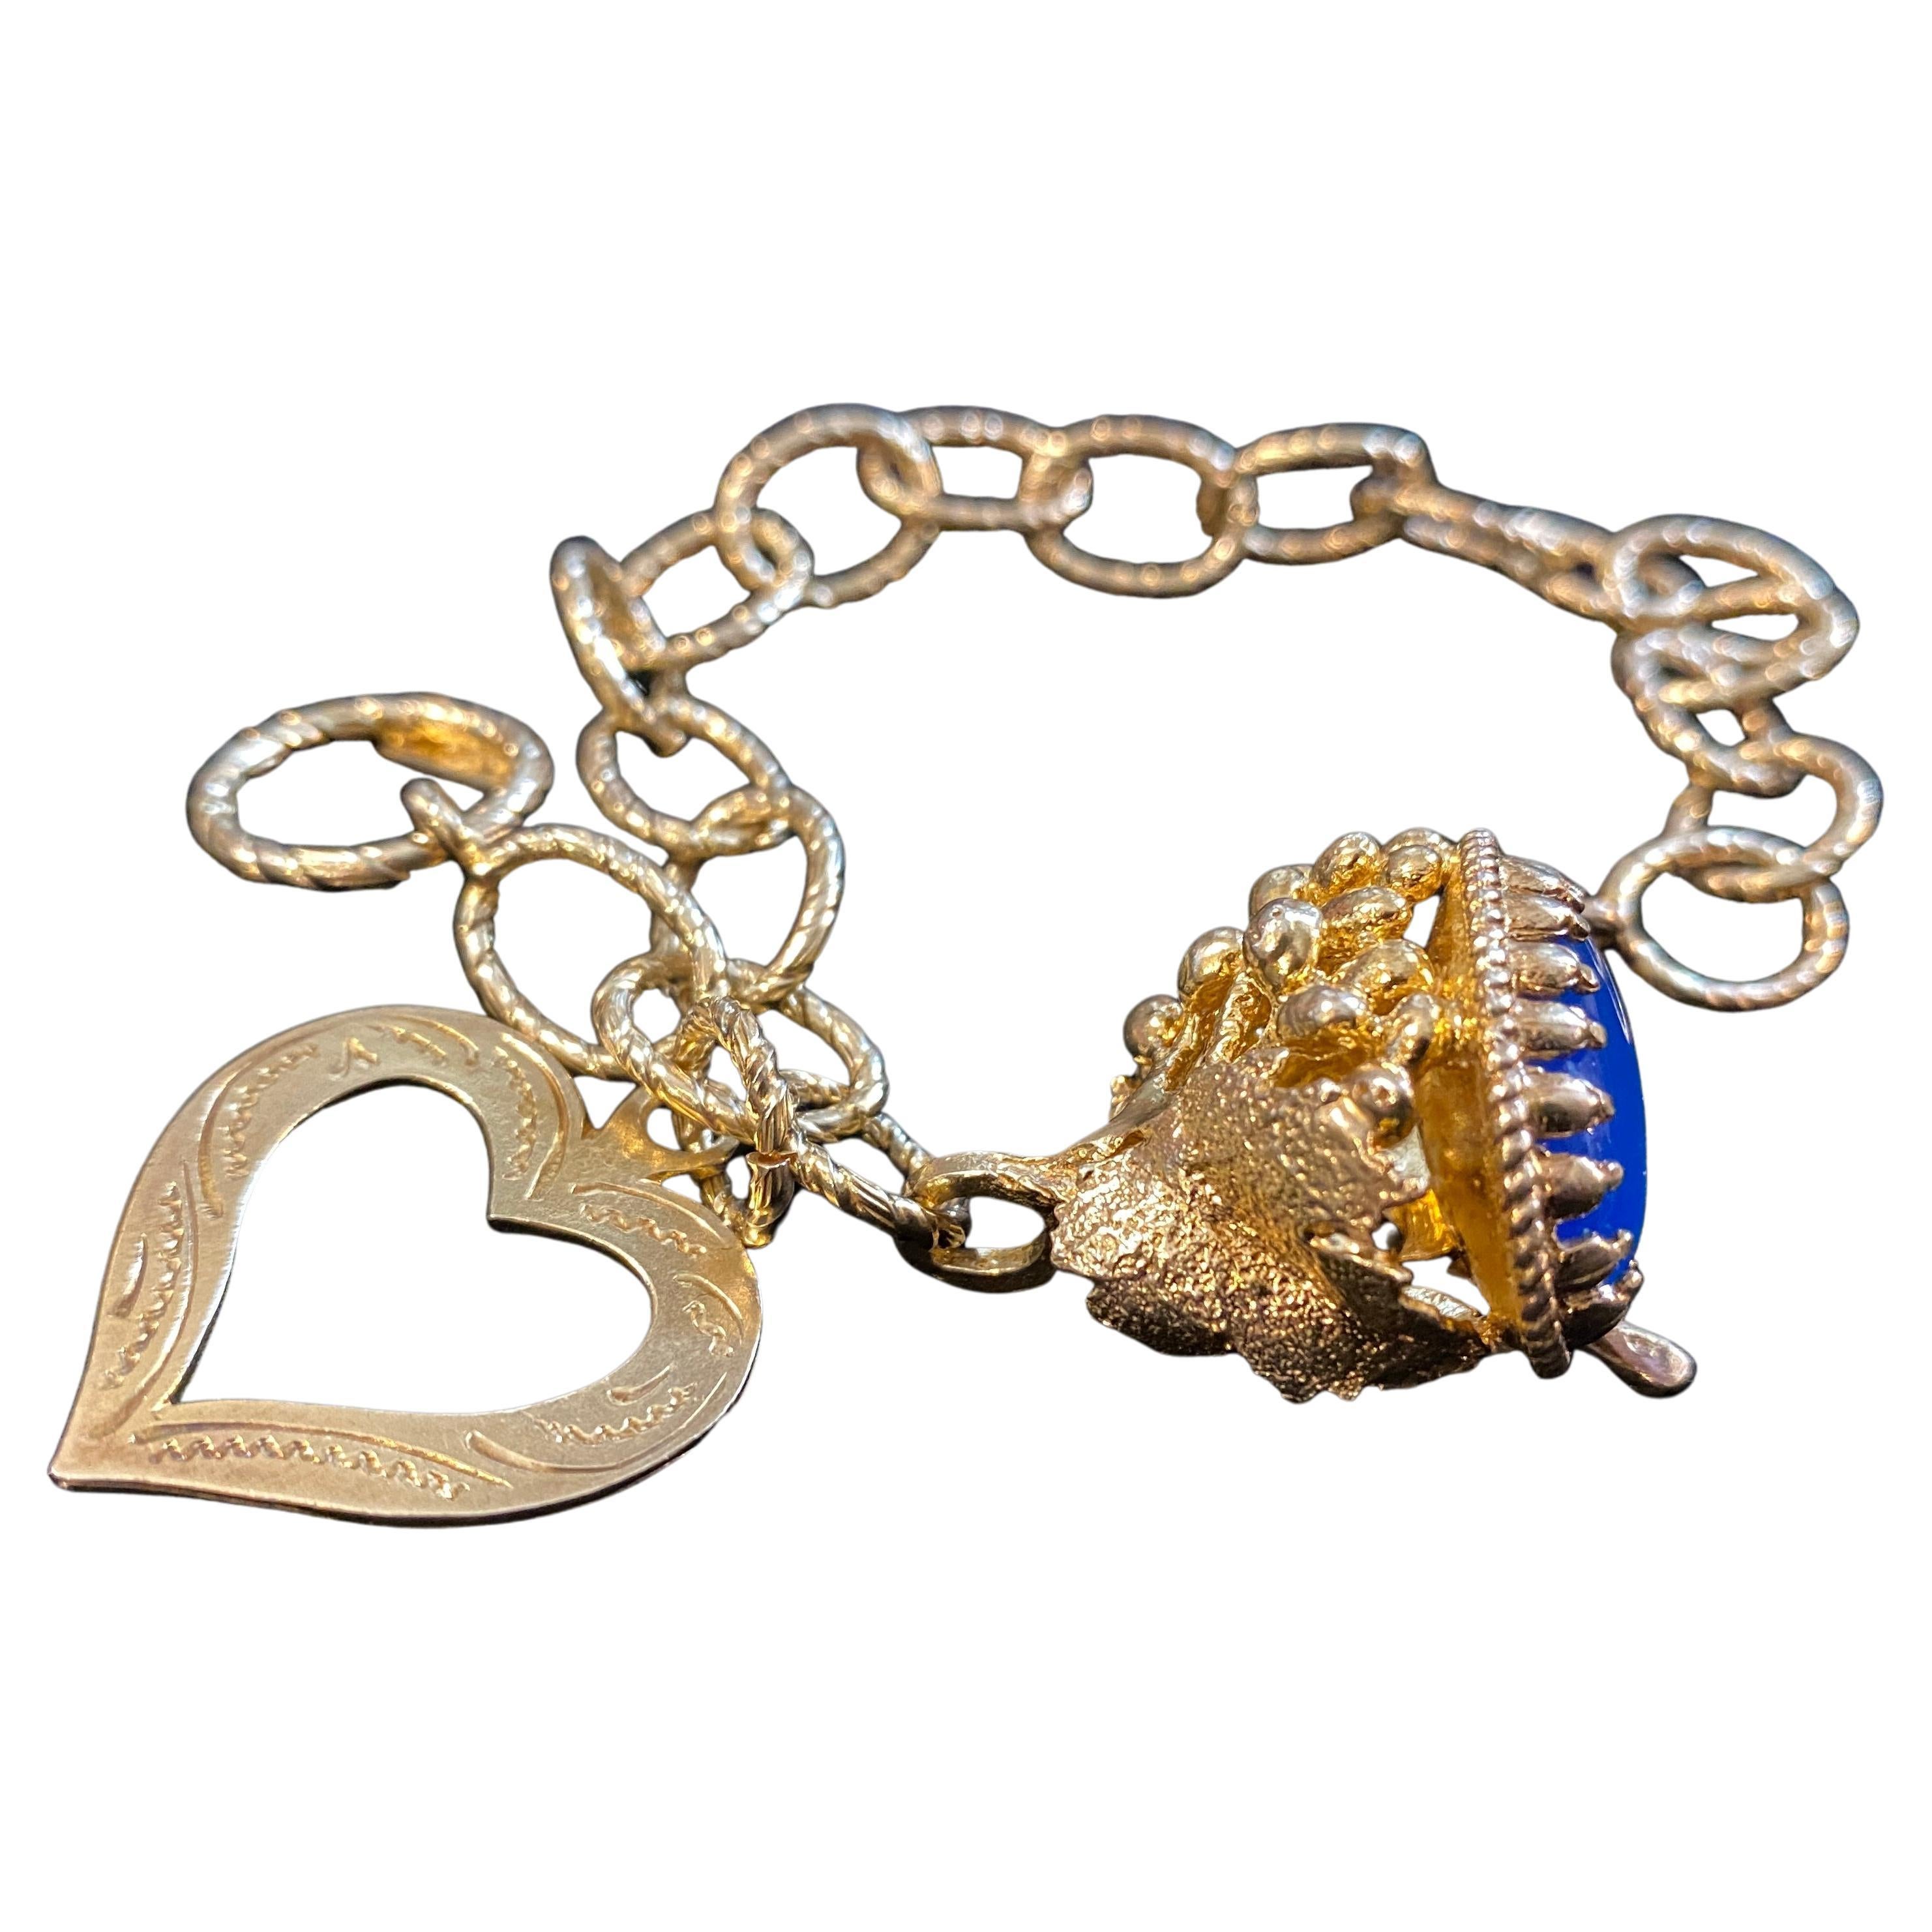 A never worn bronze bracelet with an oval blue agate cabochon and an heart clousure designed and manufactured in Italy by Anomis. Anomis was an italian small company in the context of vintage jewelry. However, the materials used, the craftsmanship